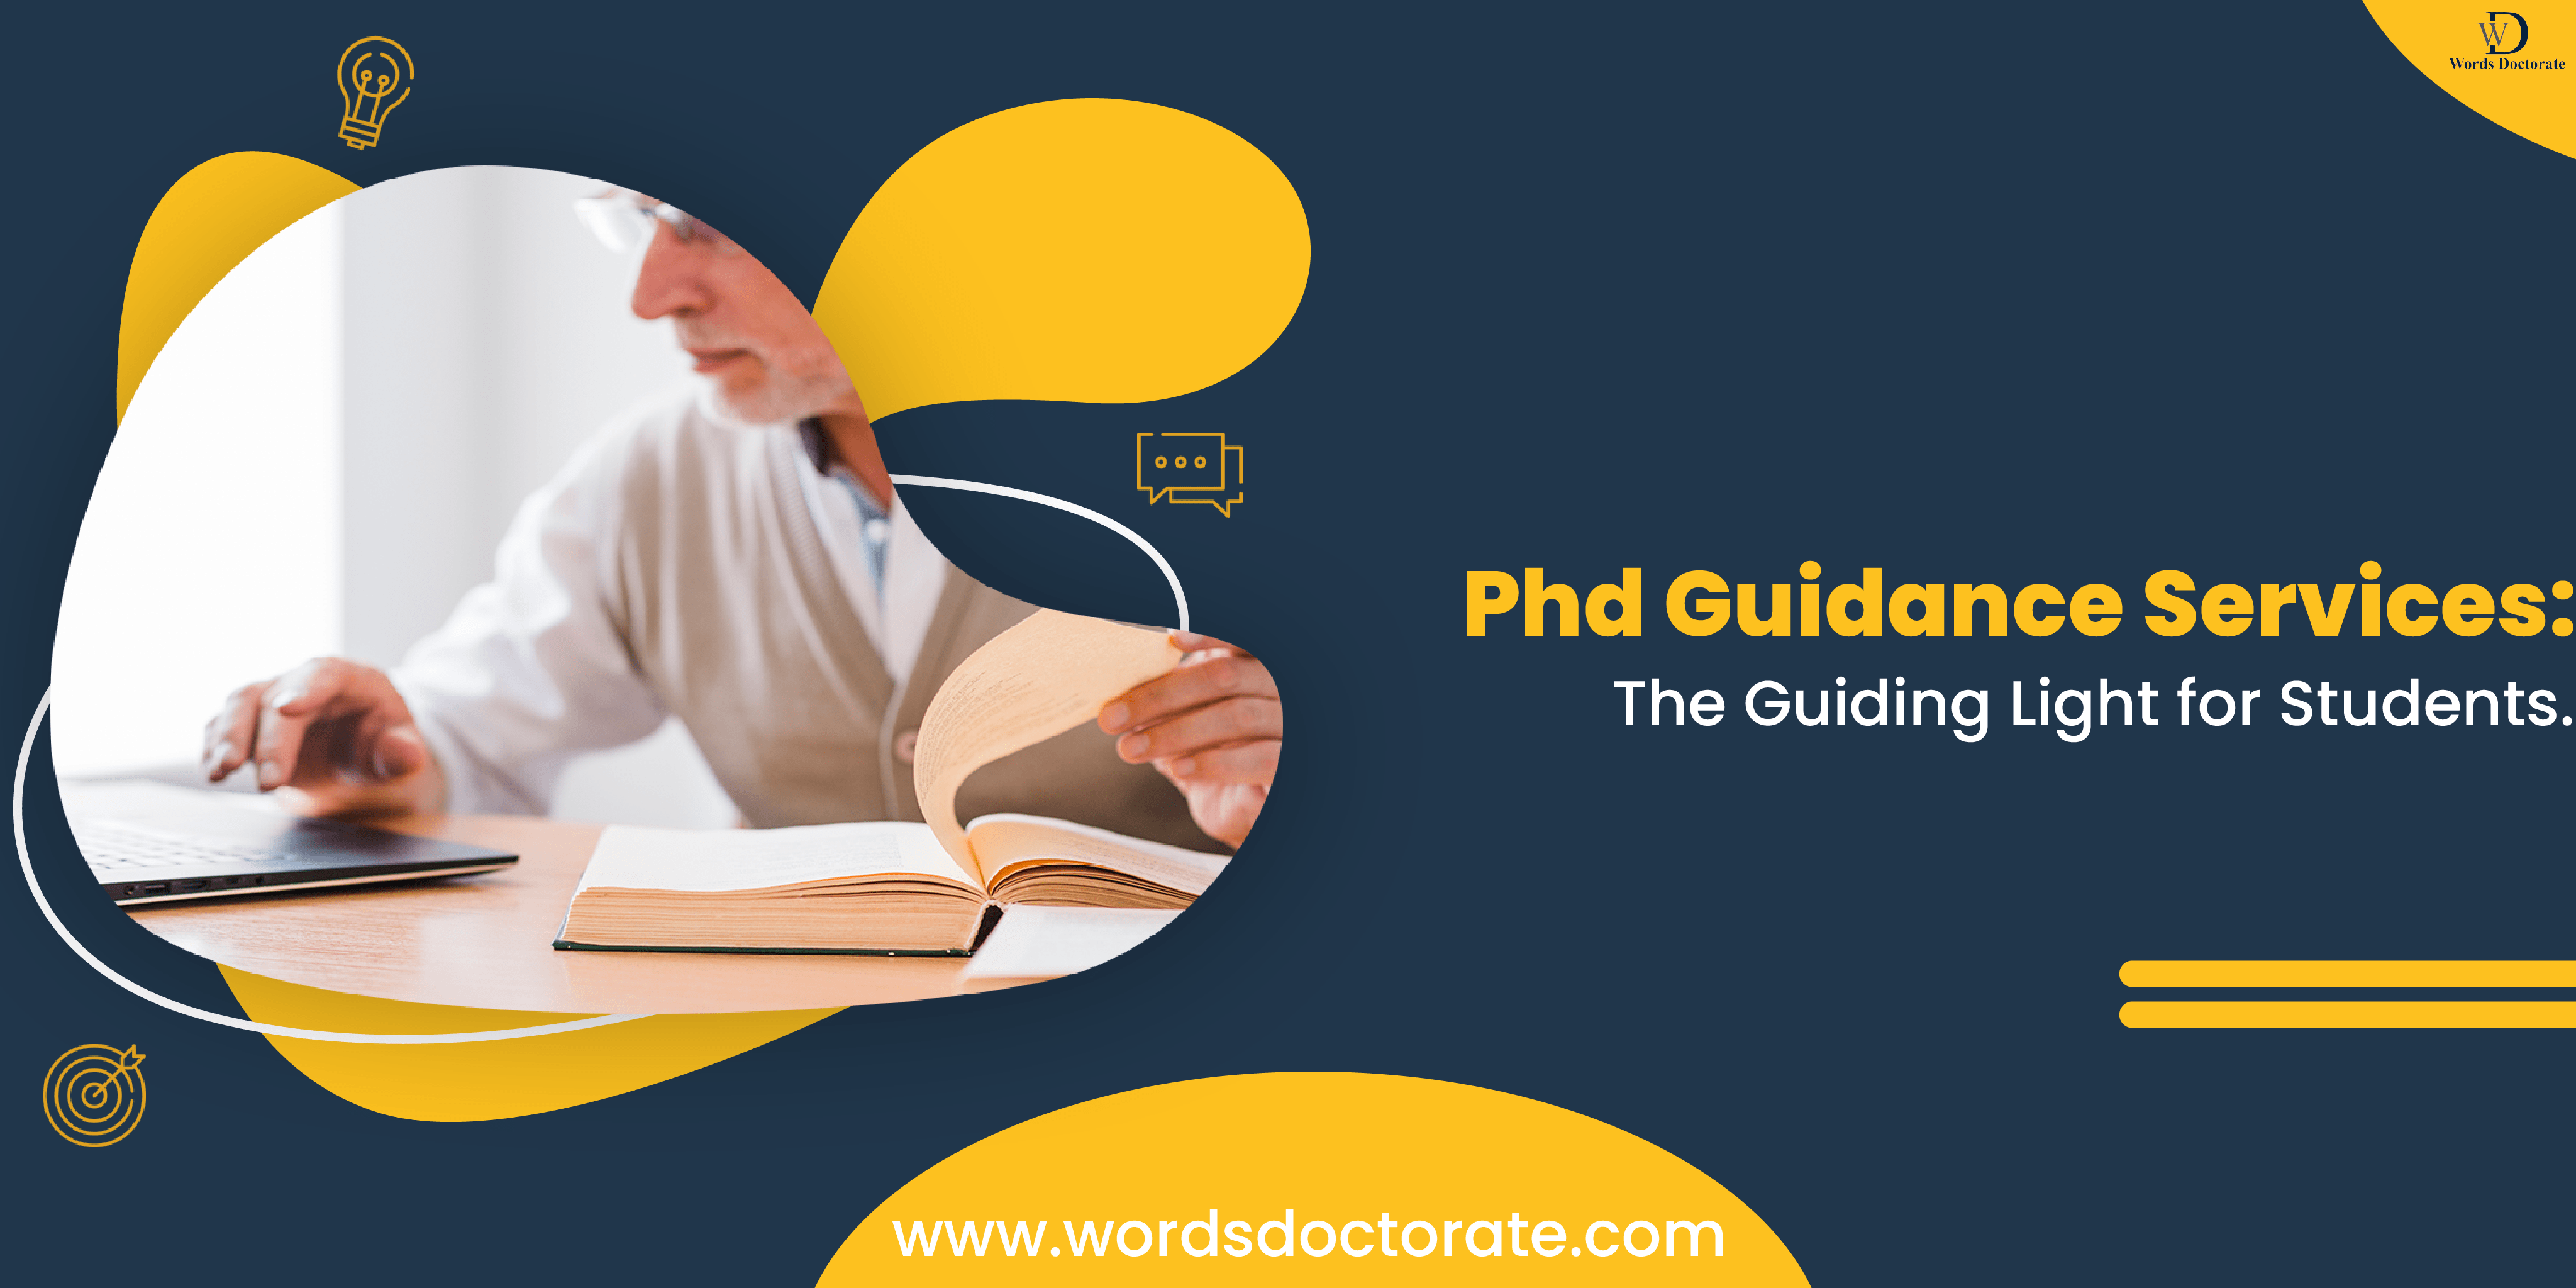 PhD Guidance Services: The Guiding Light for Students